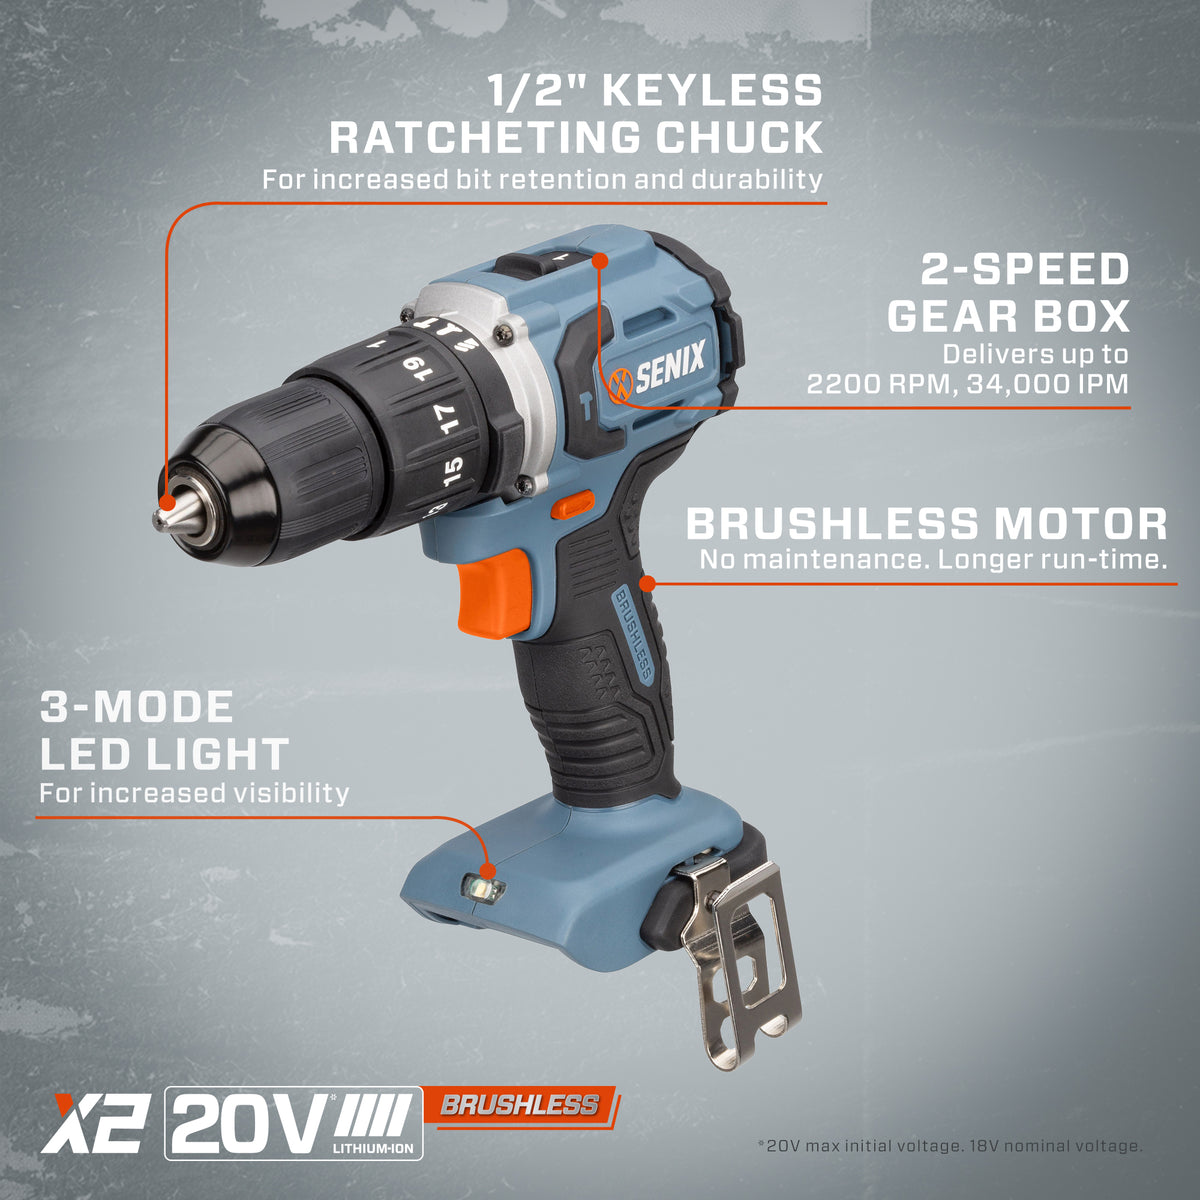 WEN 20-Volt Max Brushless Cordless 1/2 in. Hammer Drill and Driver